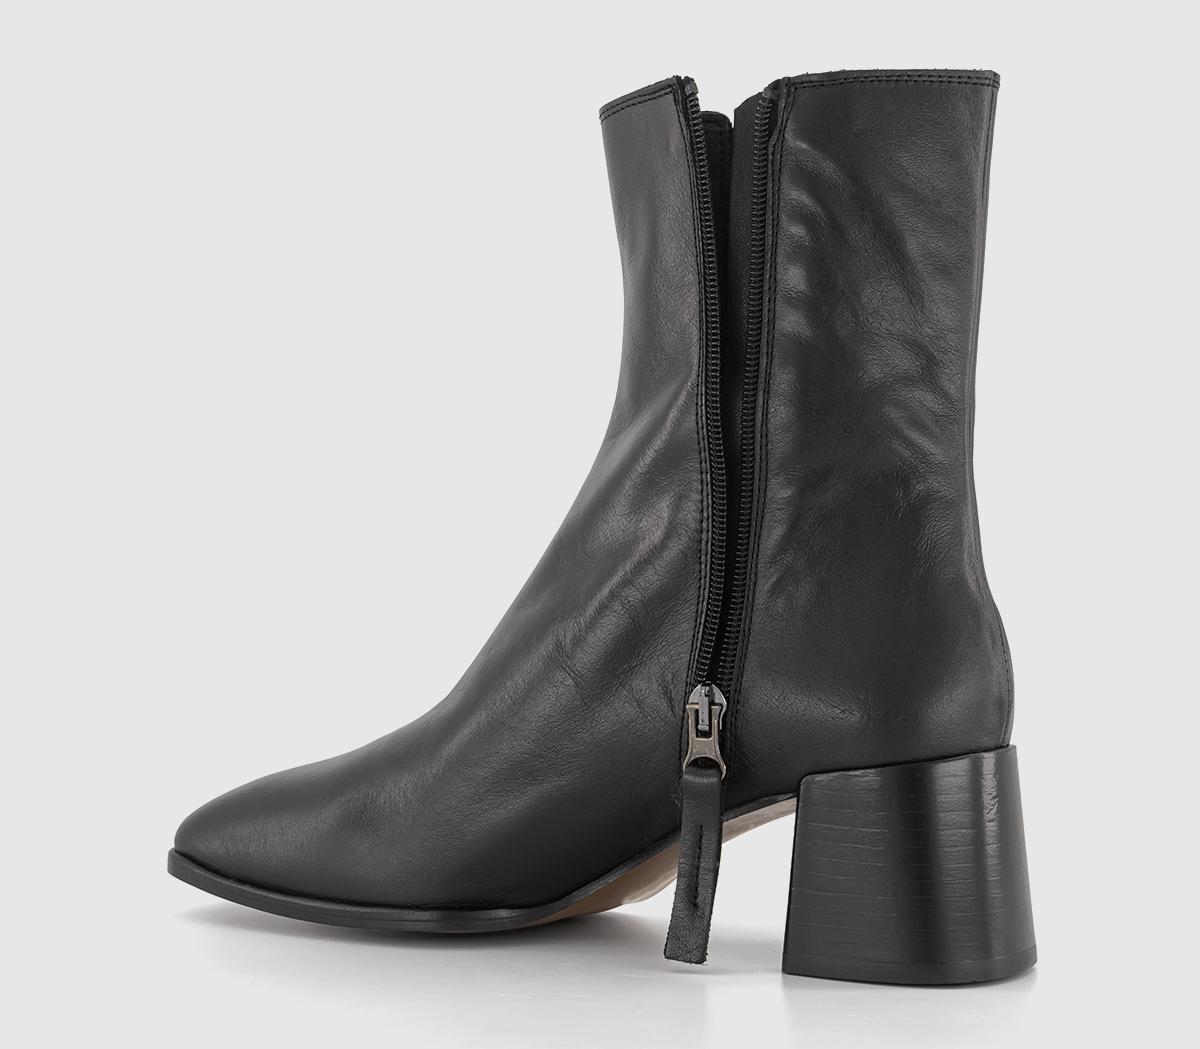 OFFICE Alissa Heeled Chelsea Boots Black Leather - Women's Ankle Boots